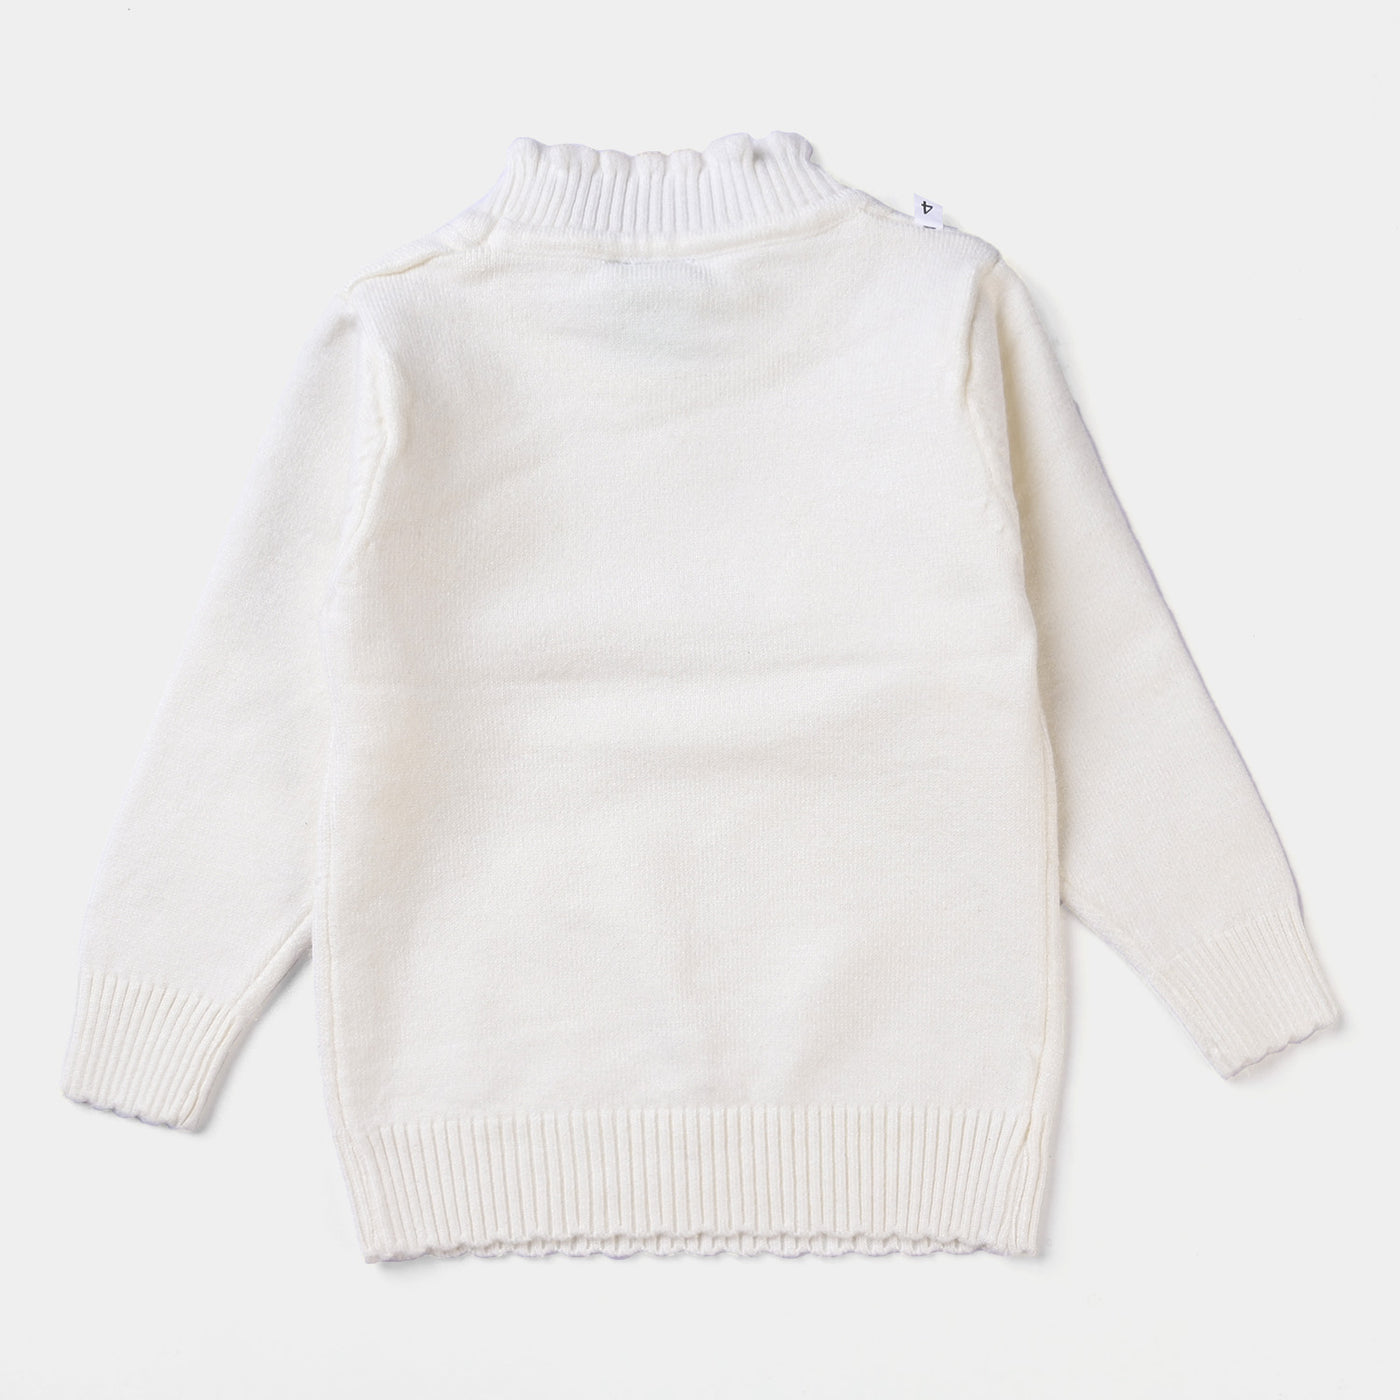 Infant GIrls Knitted Sweater